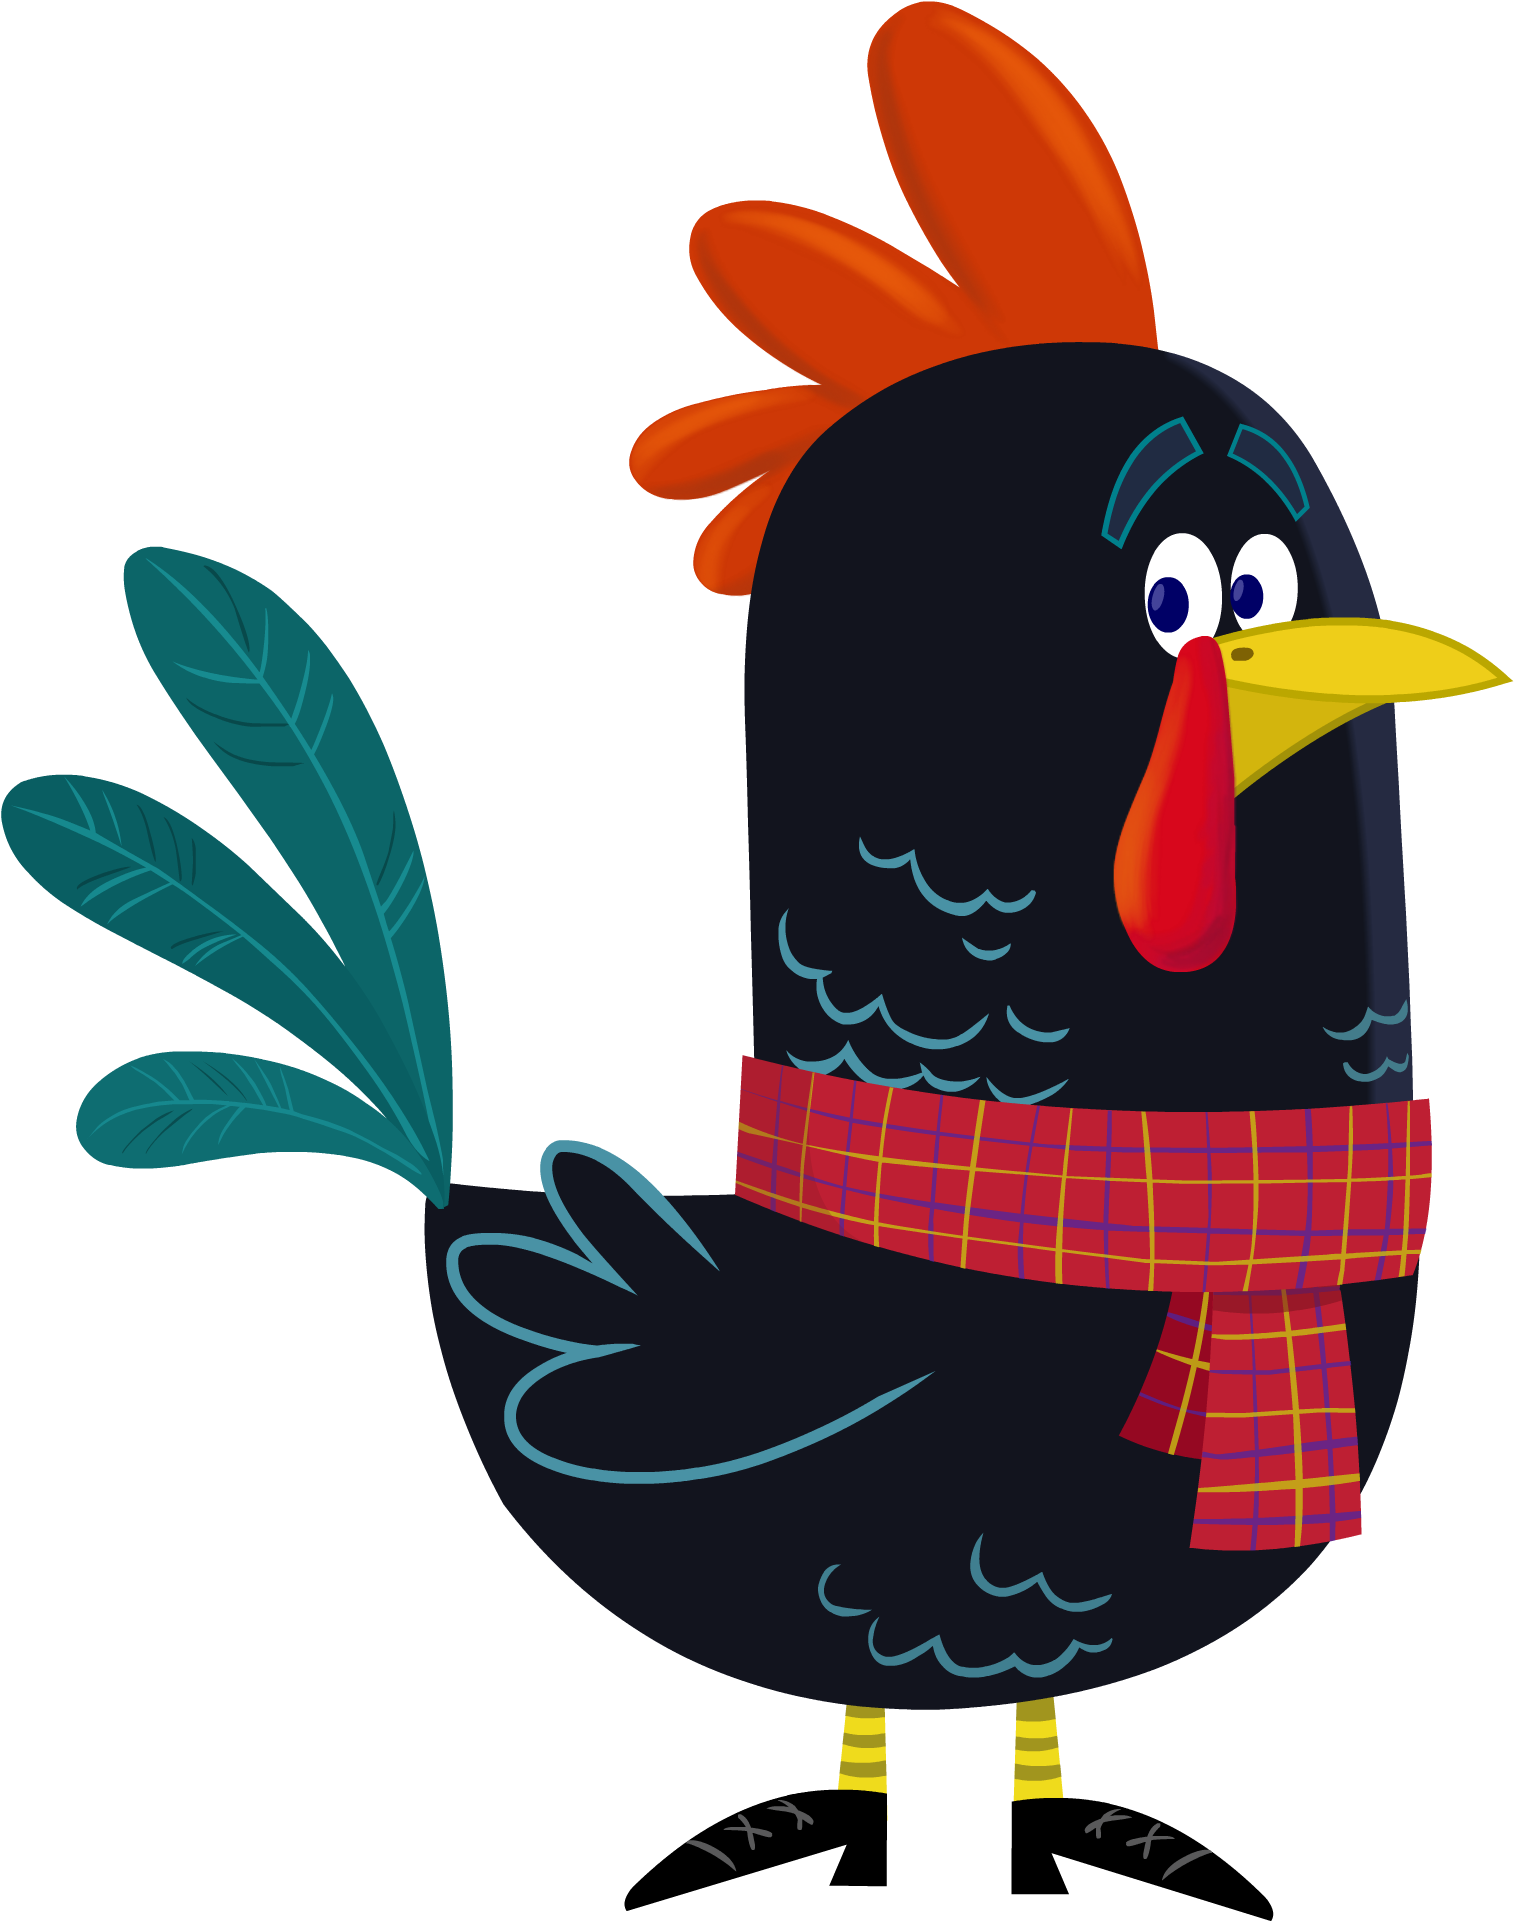 Image Character - Brewster The Rooster (1550x1947)